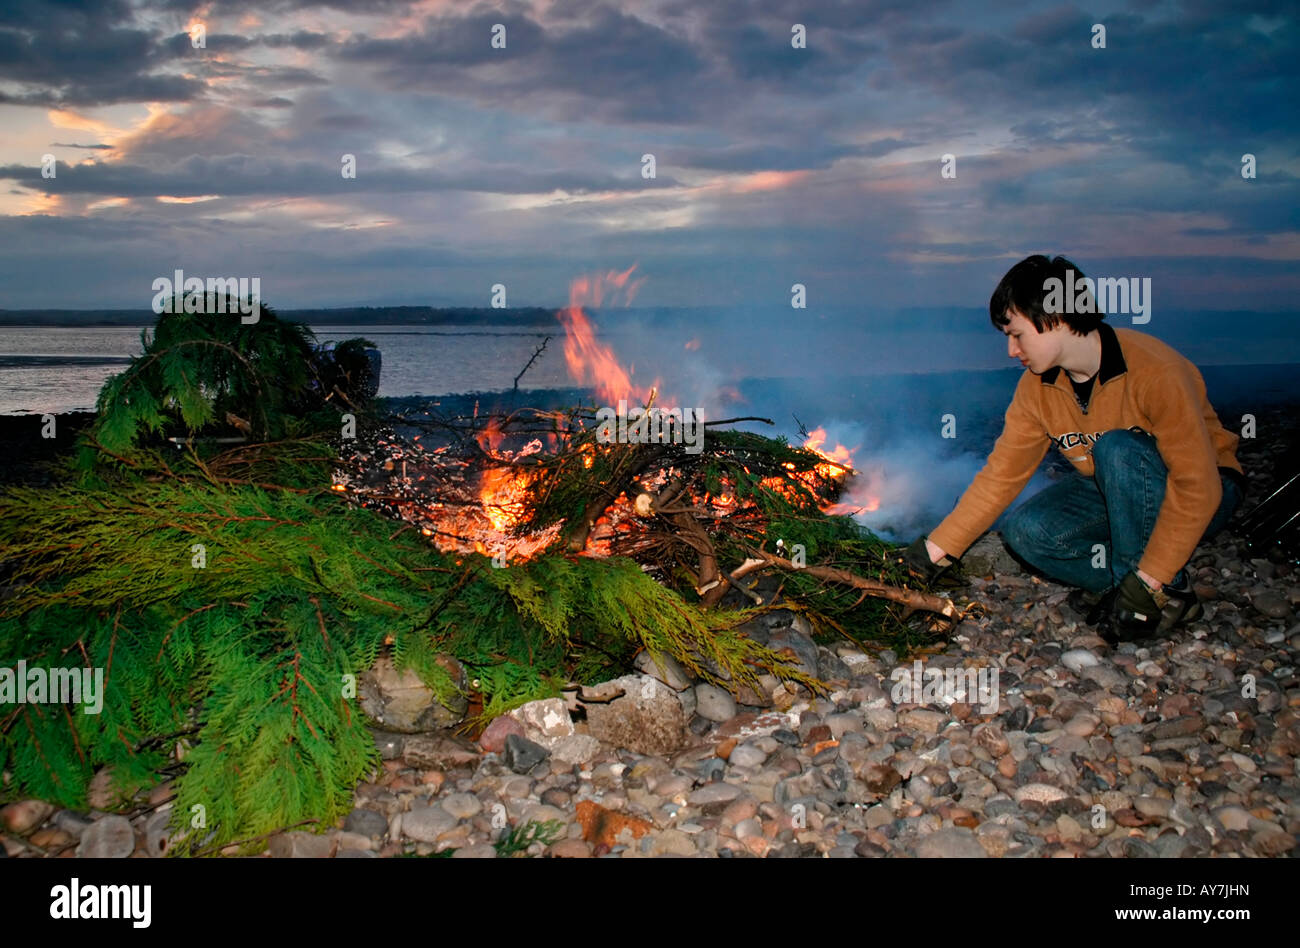 A teenage boy attends to a bonfire made from tree cuttings from a garden. Stock Photo